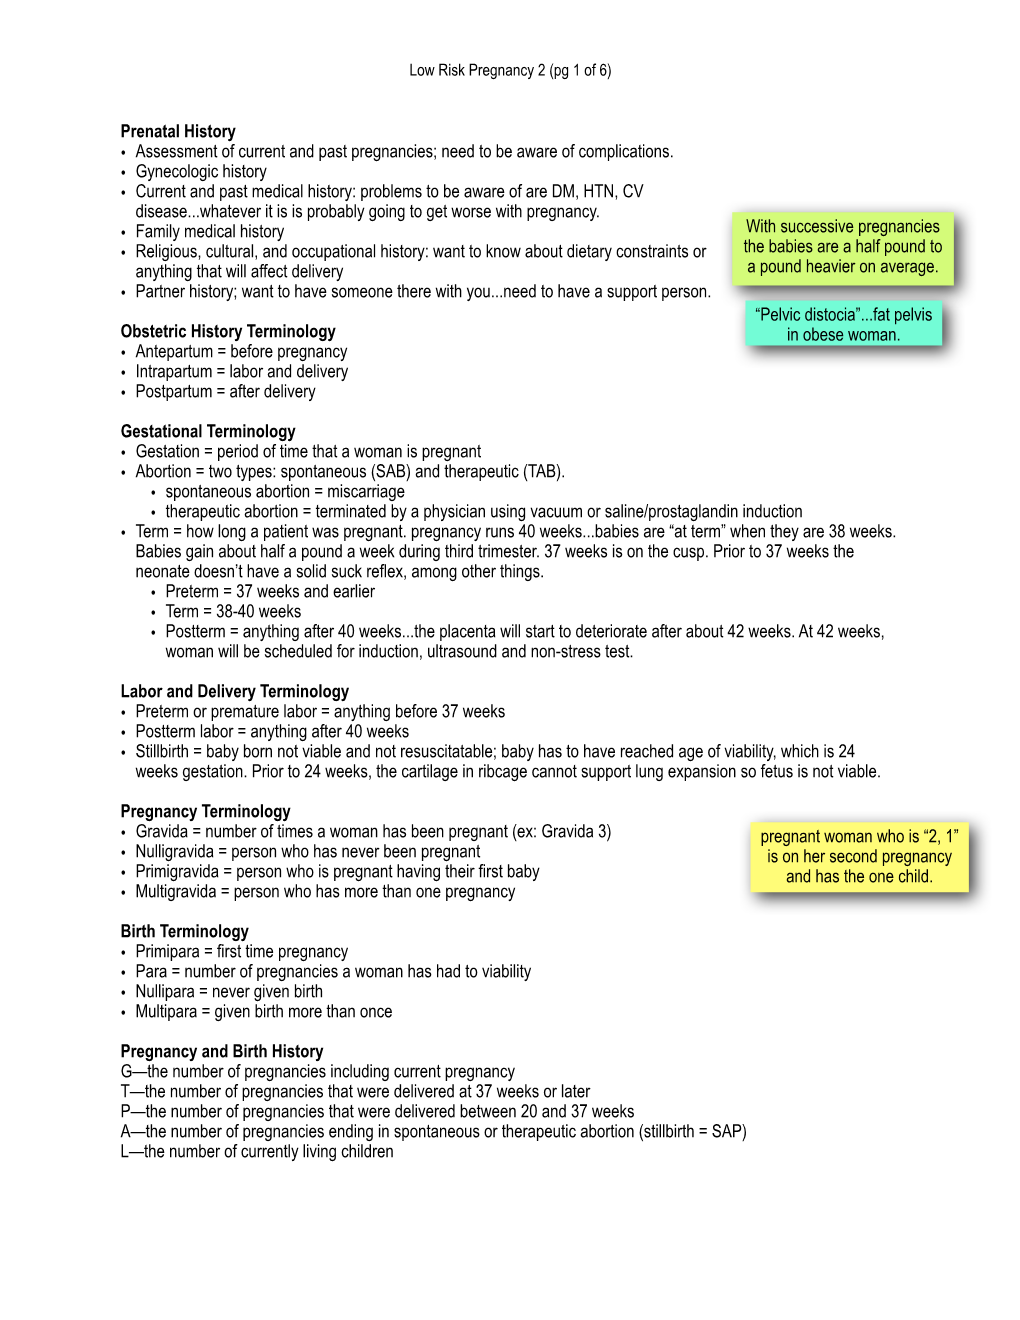 Low Risk Pregnancy 2 Notes